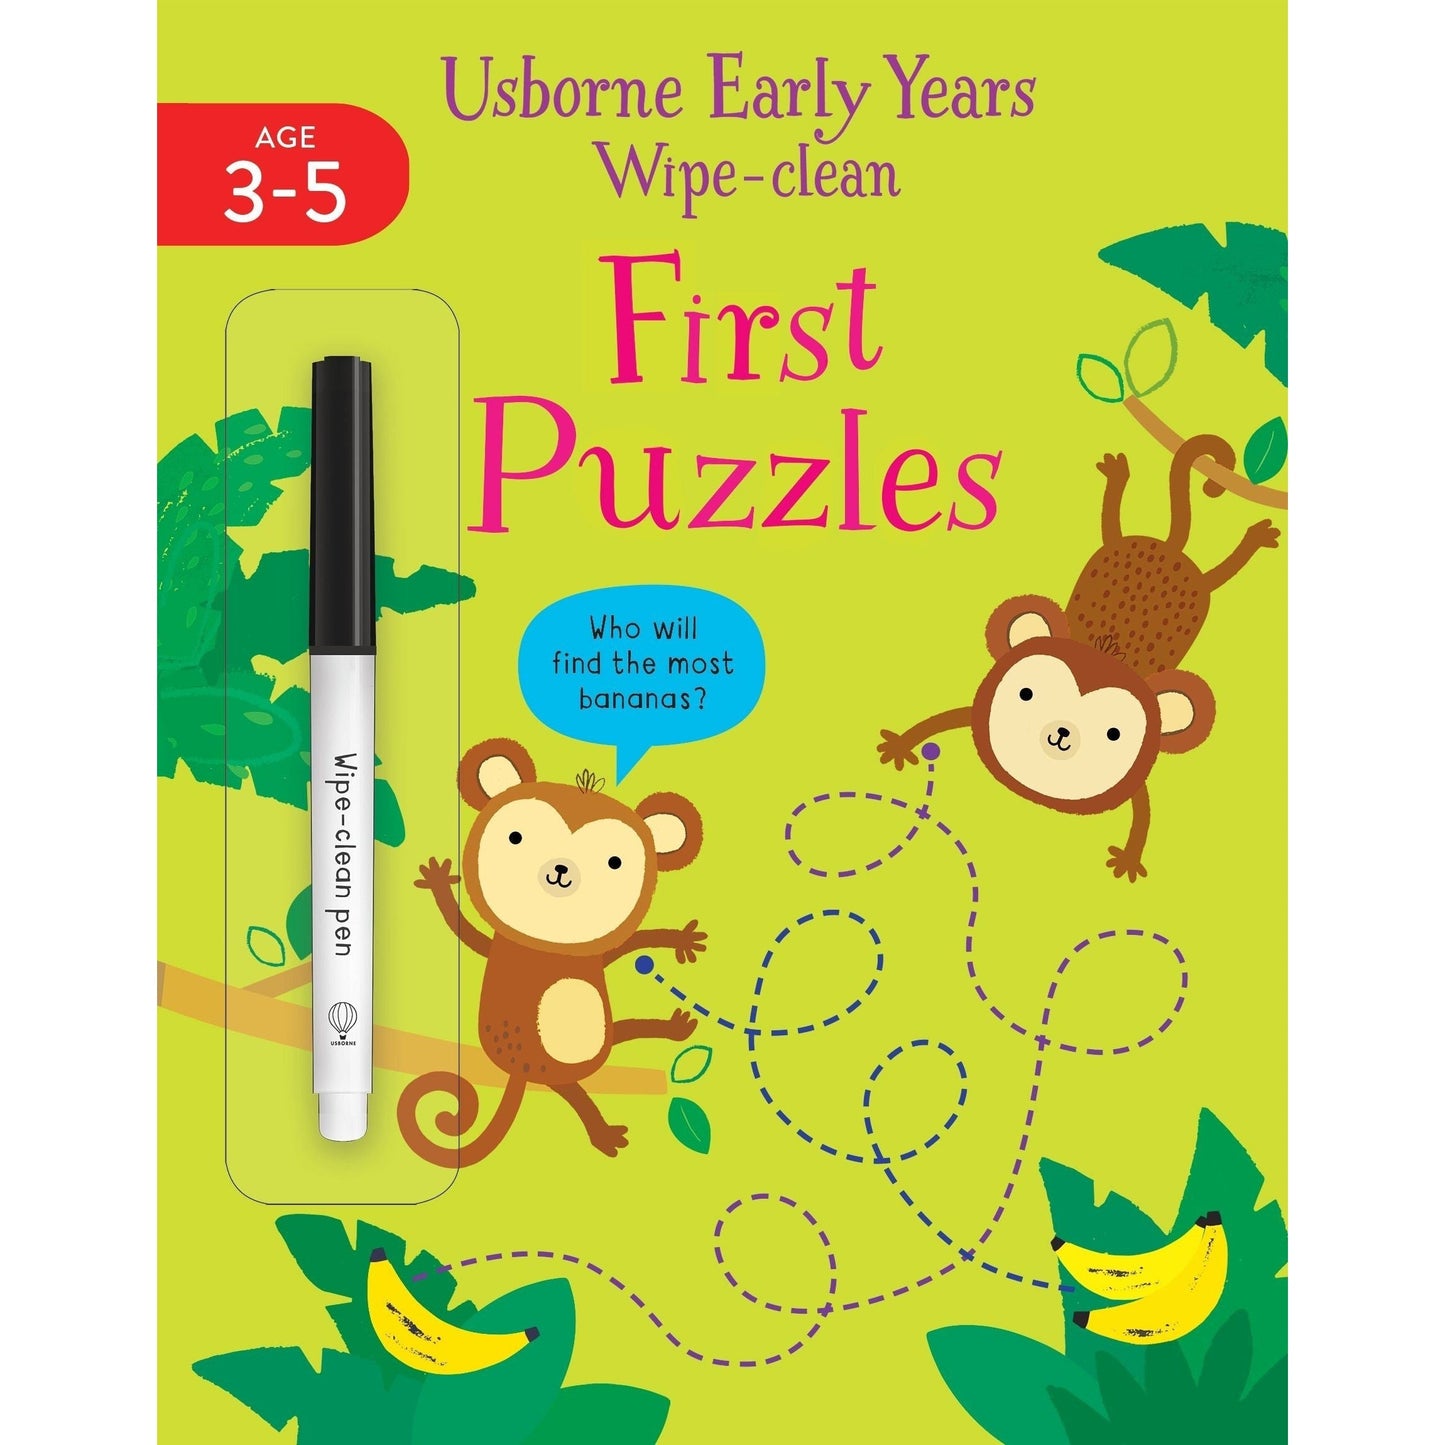 Early Years Wipe-Clean First Puzzles (Usborne Early Years Wipe-clean) - Jessica Greenwell & Genine Delahaye